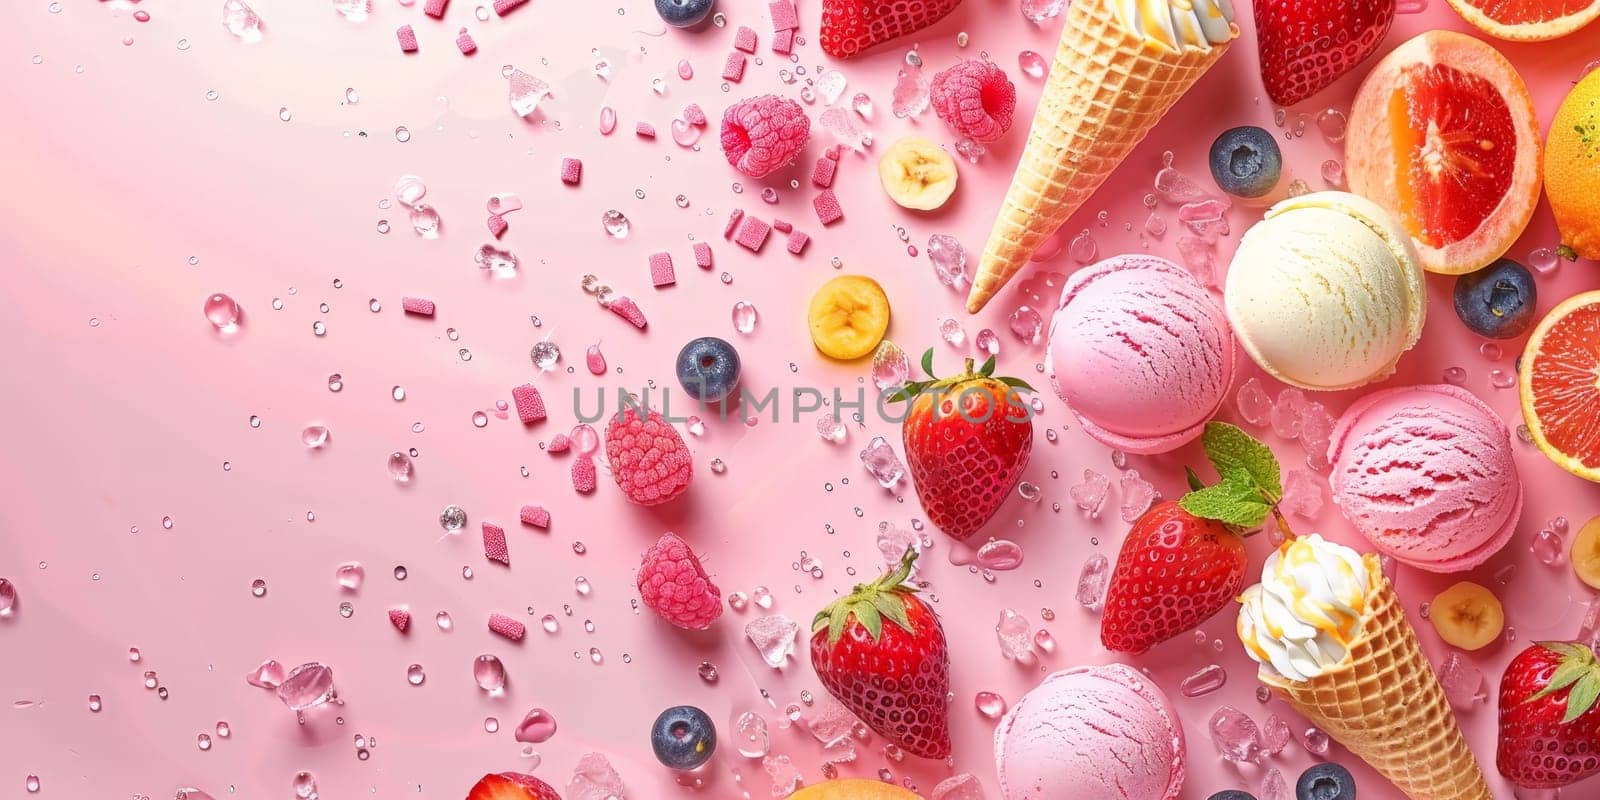 A colorful display of ice cream, fruit, and ice cream cones on a pink background. Concept of fun and indulgence, as the various flavors and textures of the ice cream